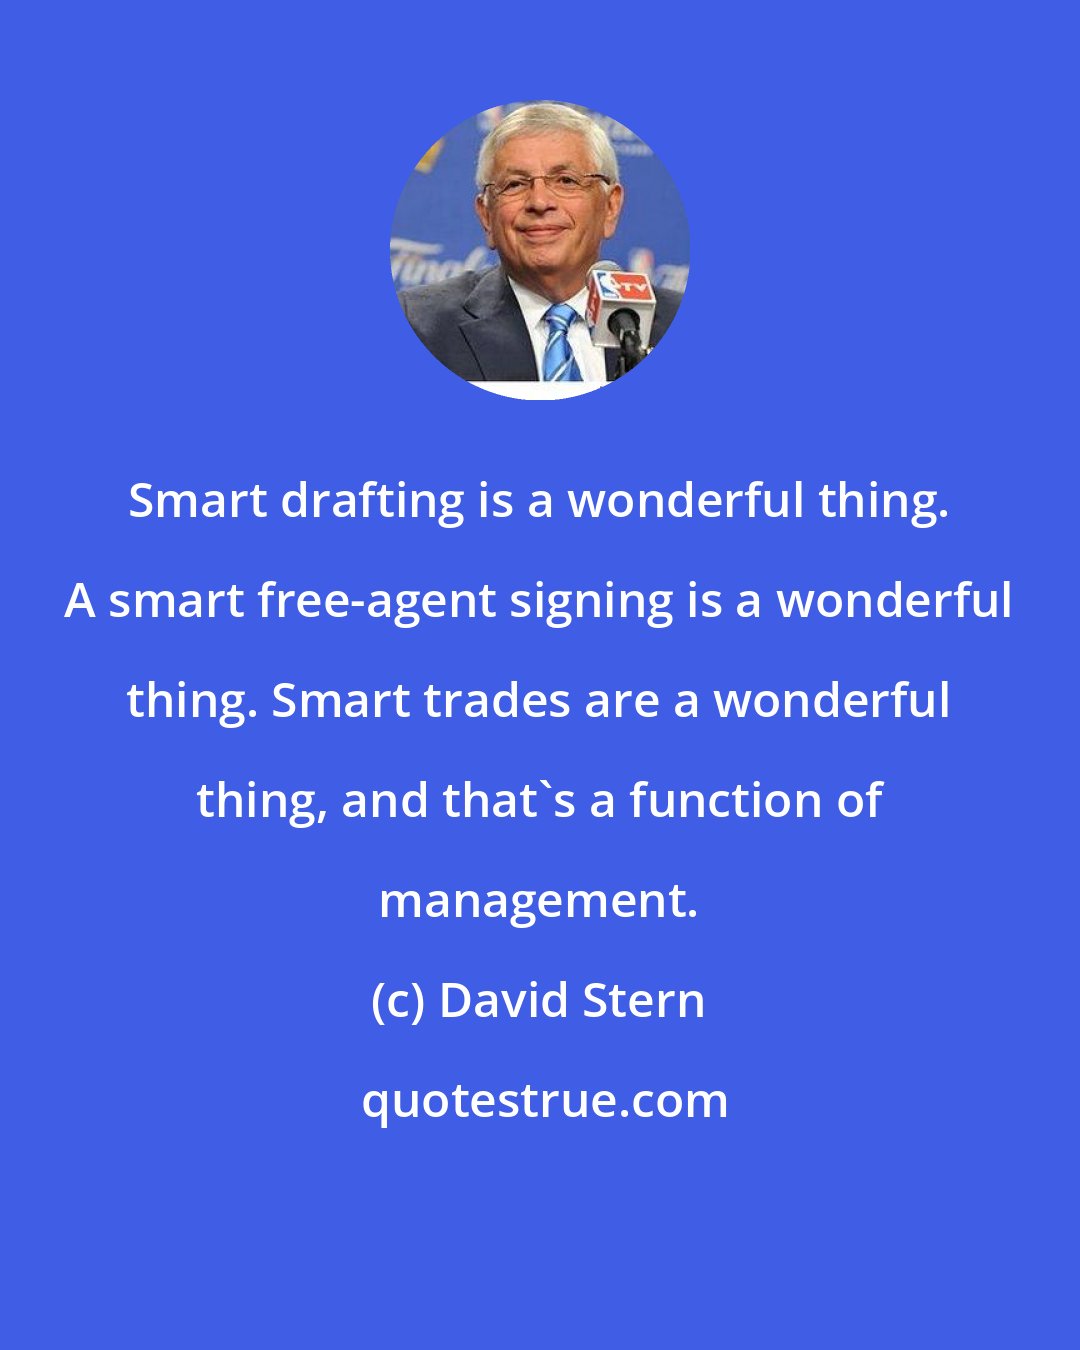 David Stern: Smart drafting is a wonderful thing. A smart free-agent signing is a wonderful thing. Smart trades are a wonderful thing, and that's a function of management.